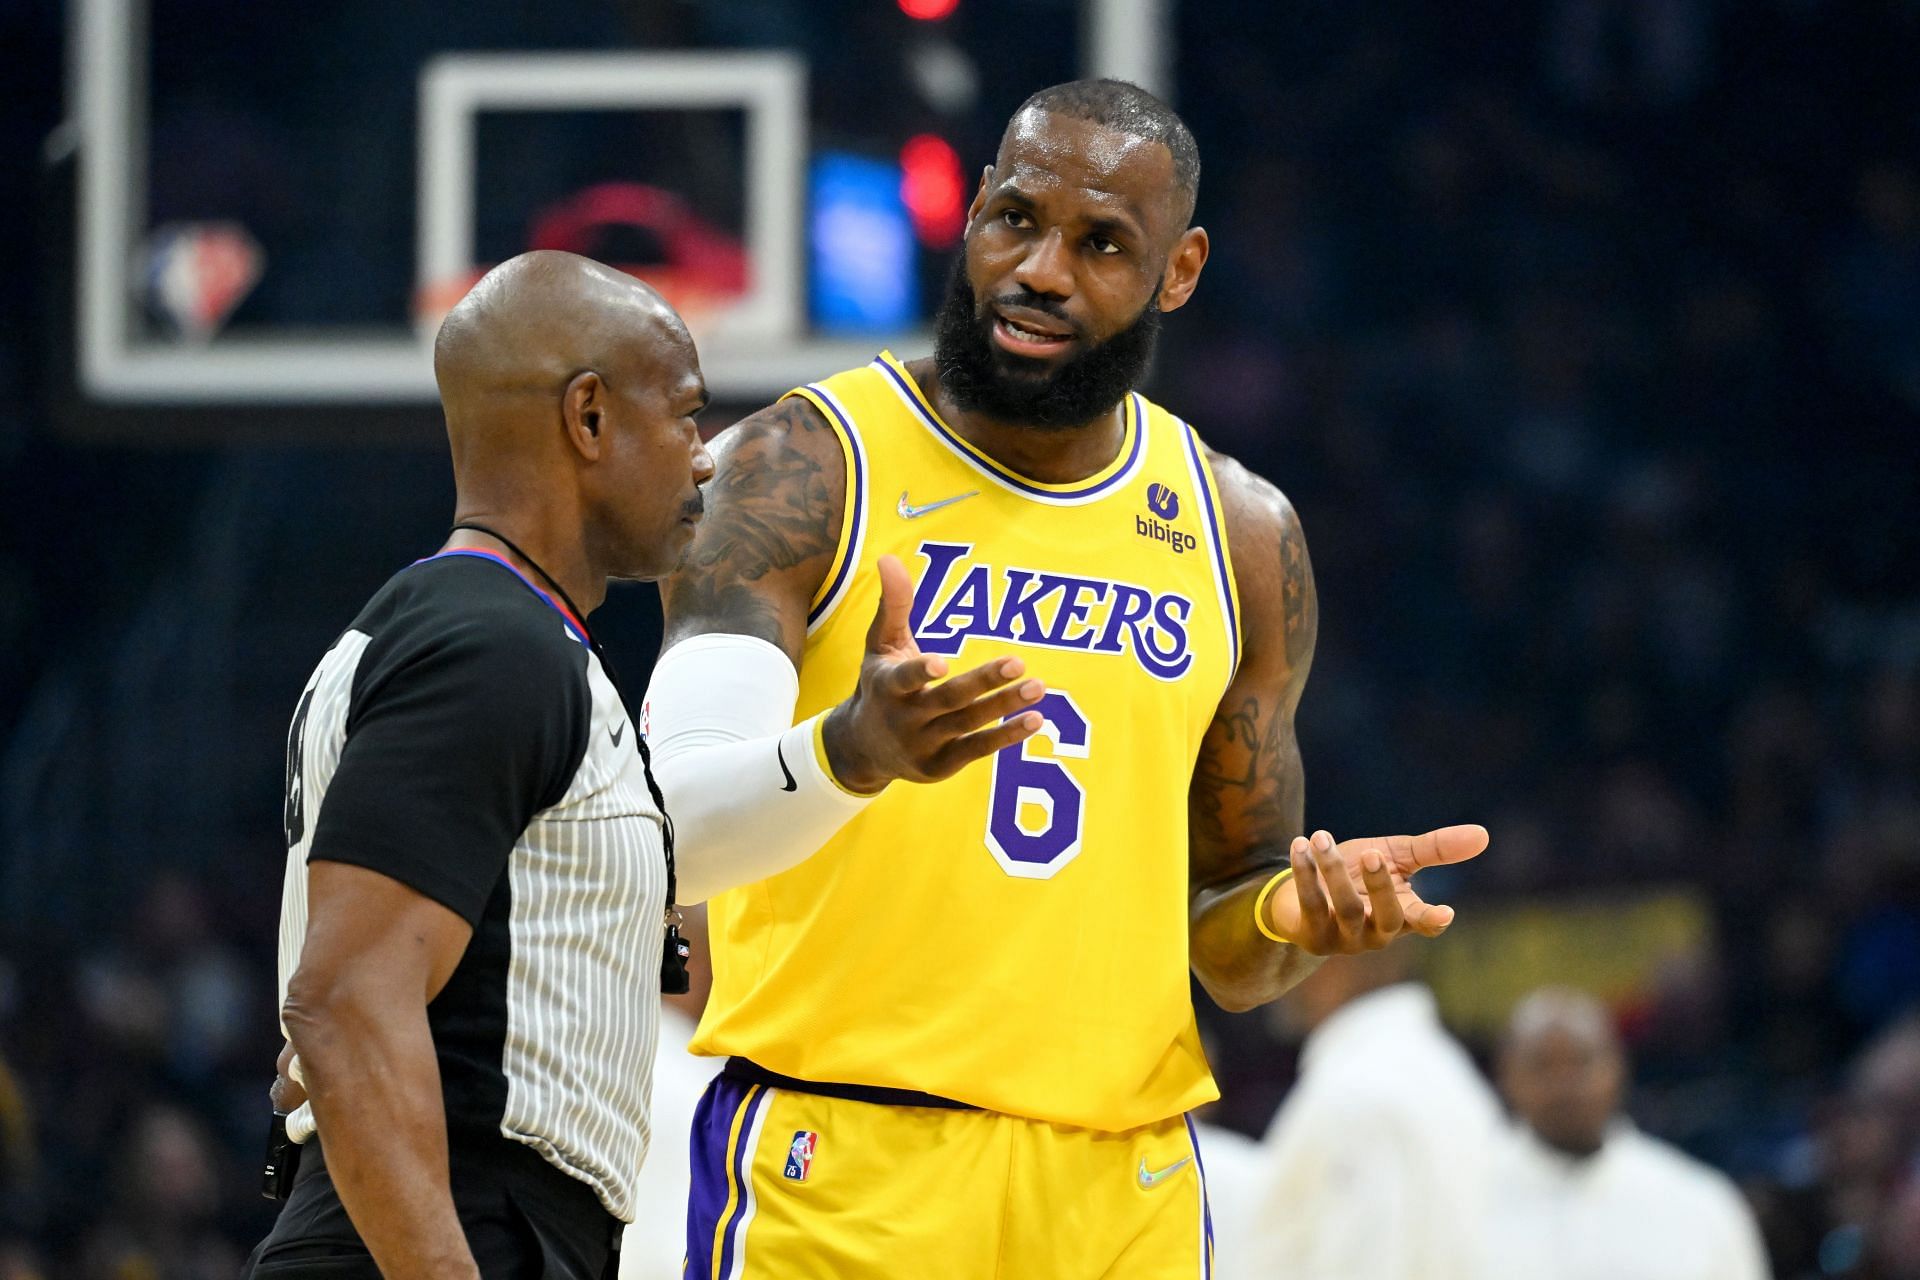 Los Angeles Lakers LeBron James talking with a referee